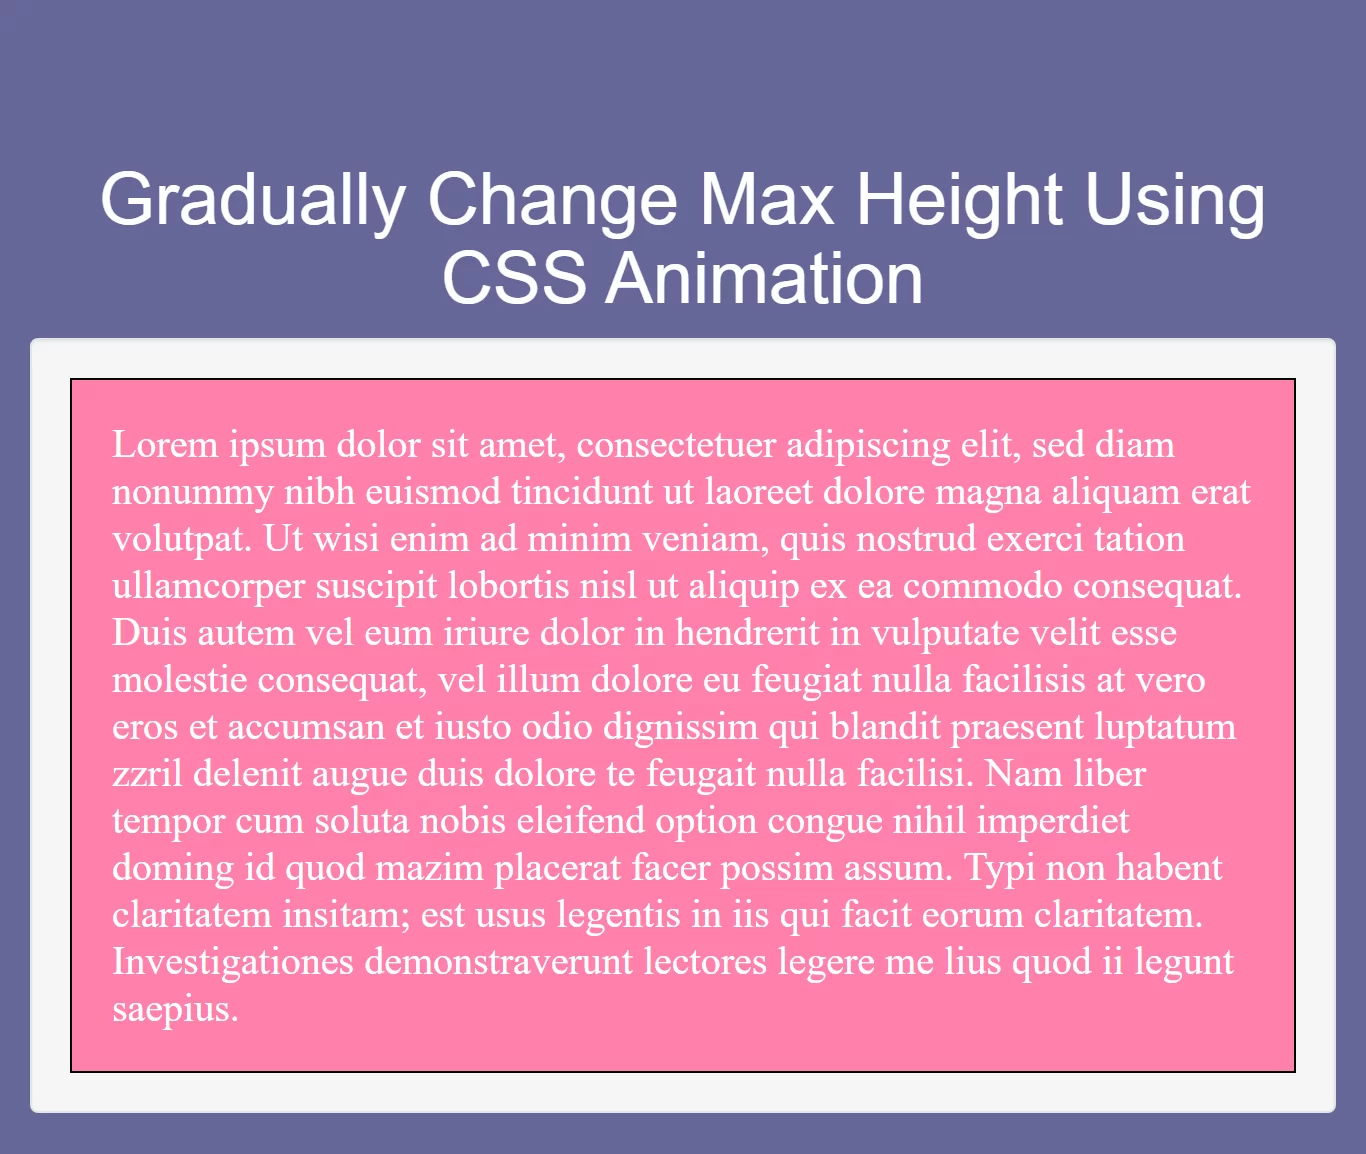 How Gradually Change Max Height Using CSS Animation